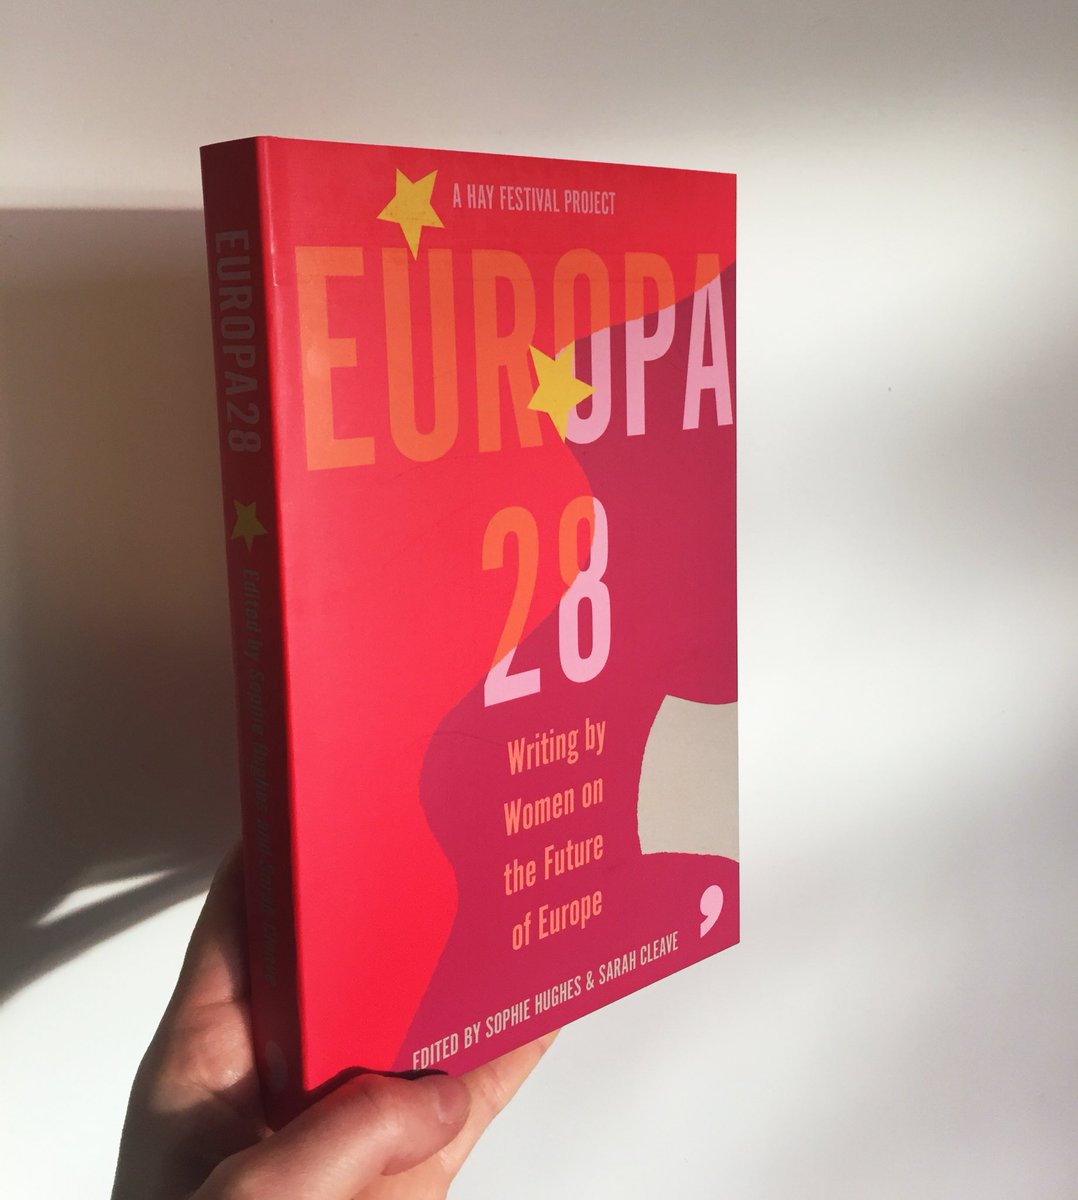 Hay Festival goes digital! Join us for TWO Europa28 panels, Tues 26th May. Events are FREE, register to attend: bit.ly/3djb7y6 Event 42 feat. @Kapka_Kassabova, Caroline Muscat, Zsofia Bán Event 44 feat. Leïla Slimani, Lisa Dwan, @HilaryCottam Hosted by @hughes_sophie.